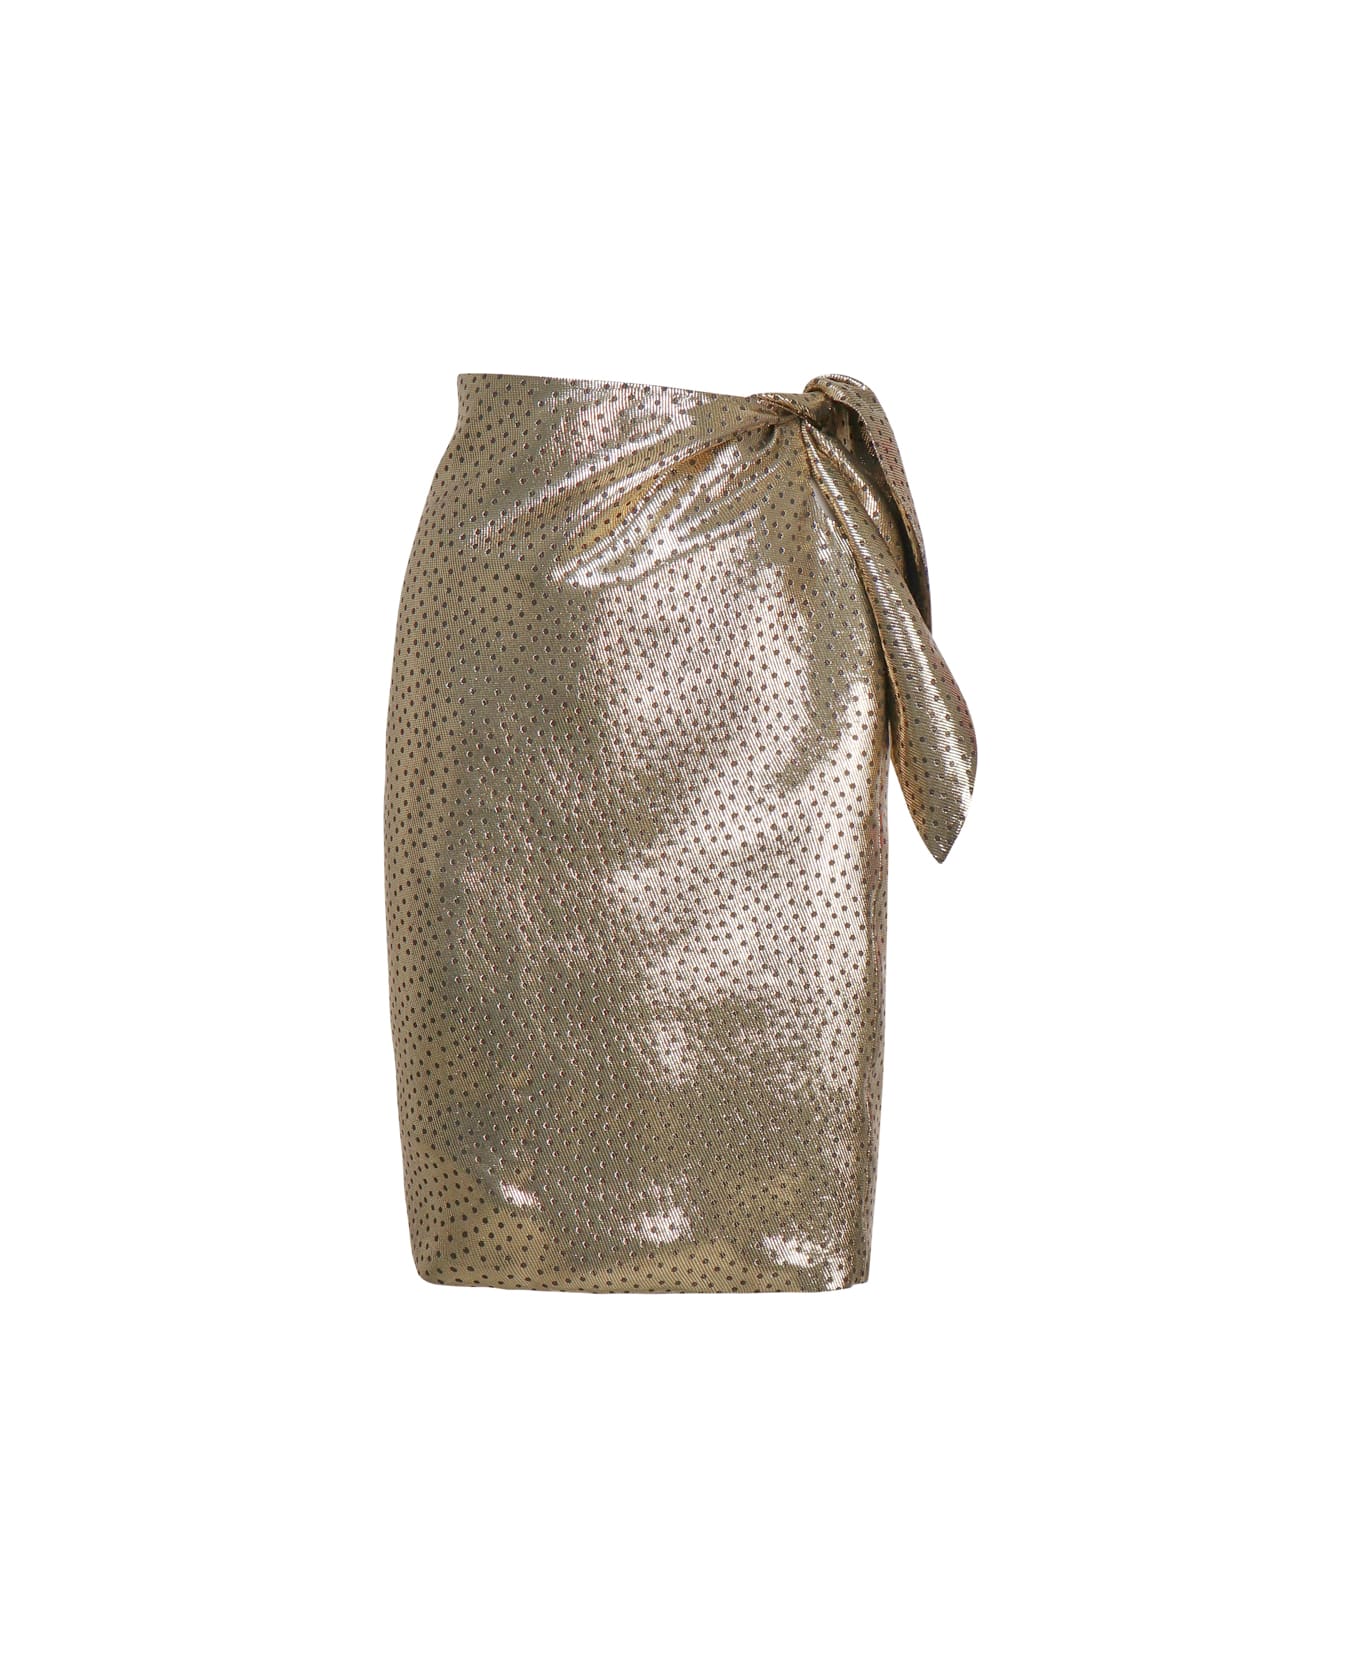 Saint Laurent Knotted Pencil Skirt In Polka Dot Lamé - Gold スカート